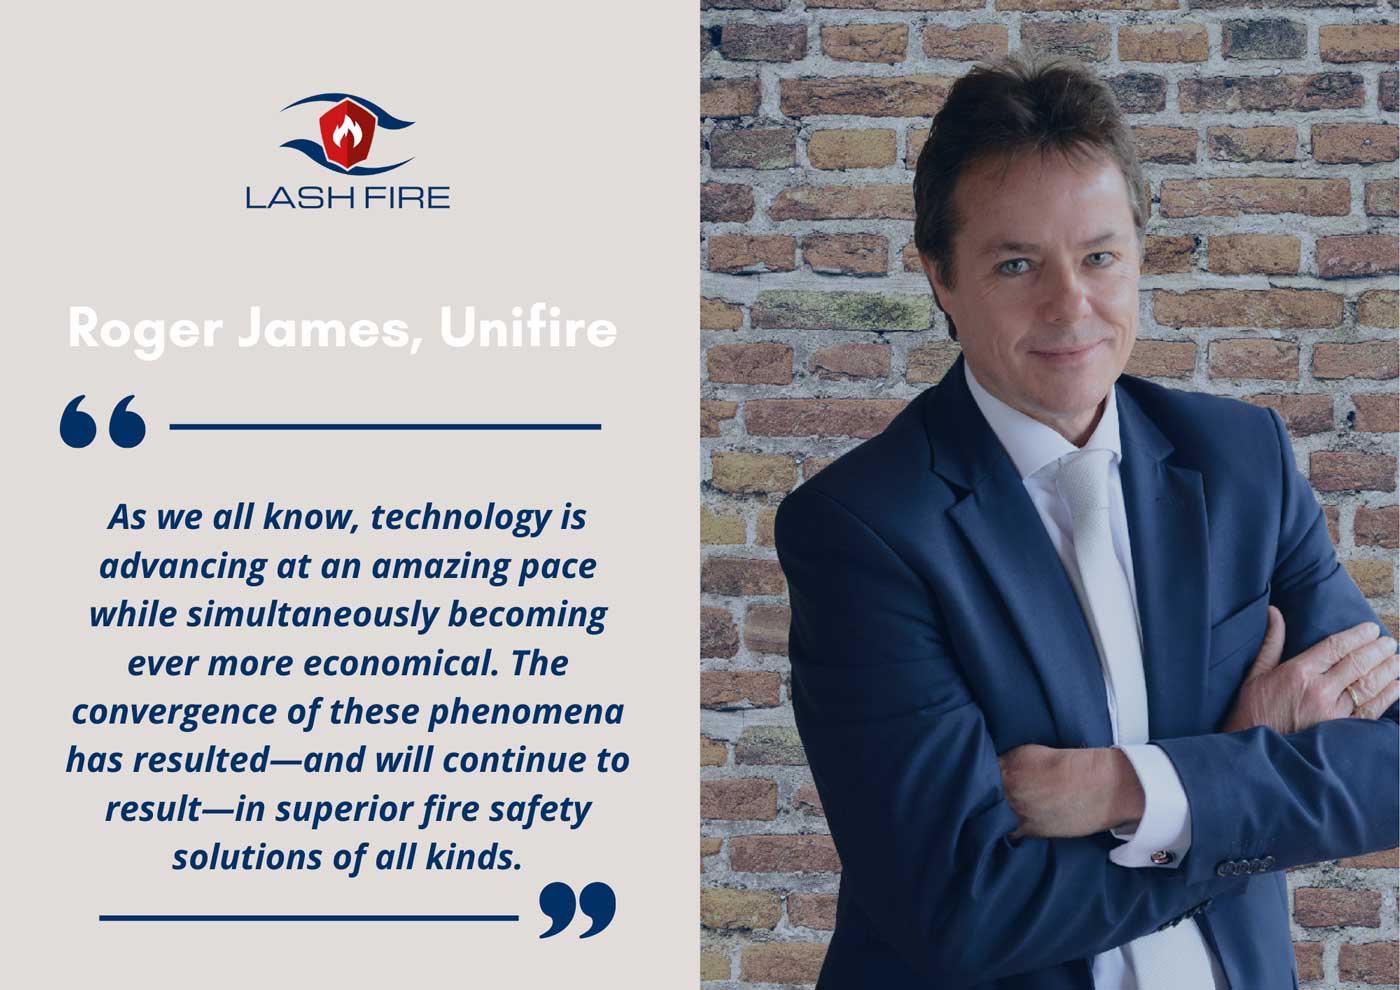 LASH FIRE Meet the Partners Interview of Roger James of Unifire